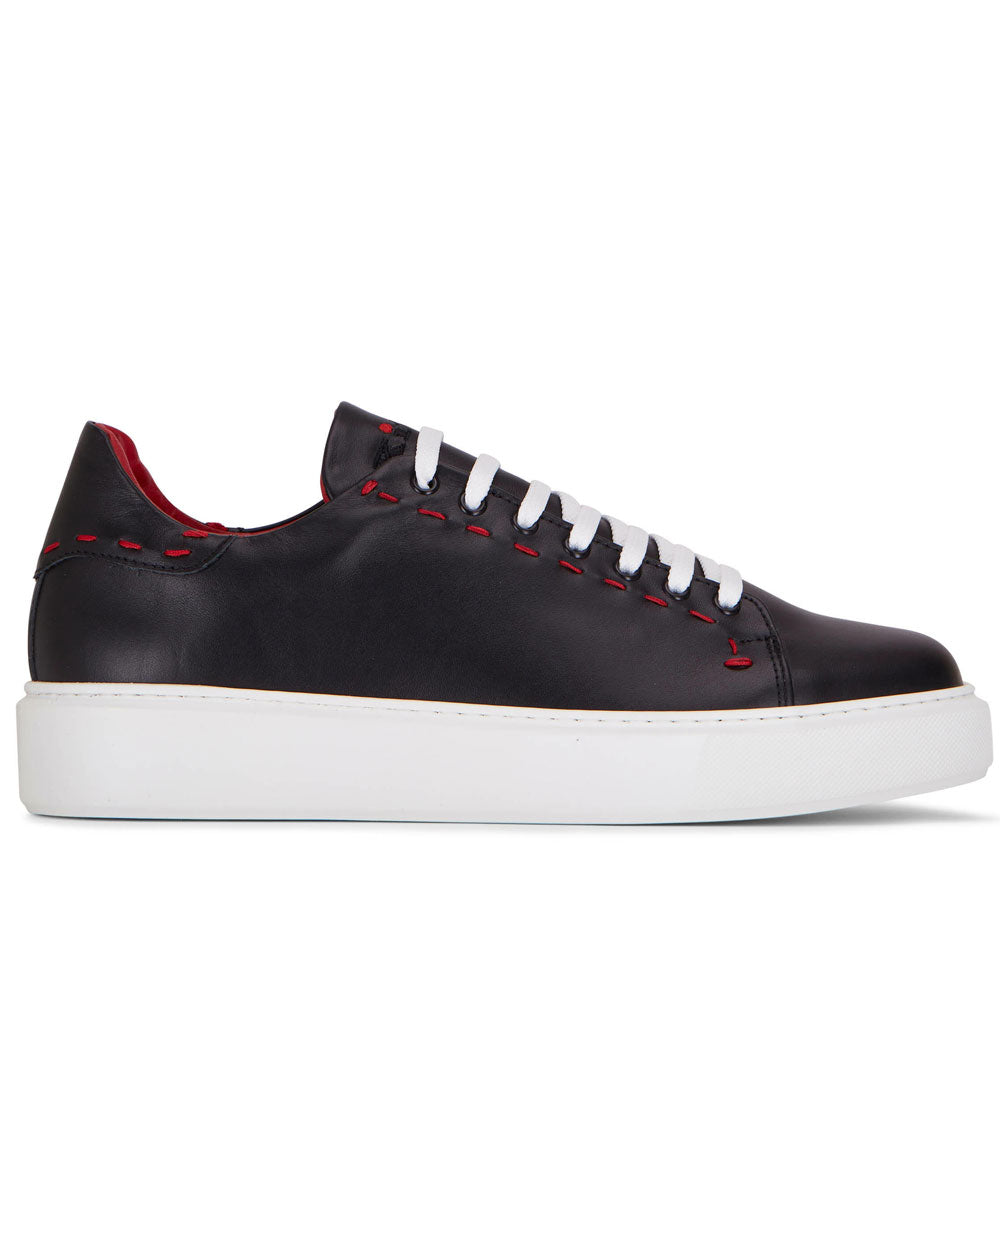 Leather Sneaker in Black and Red